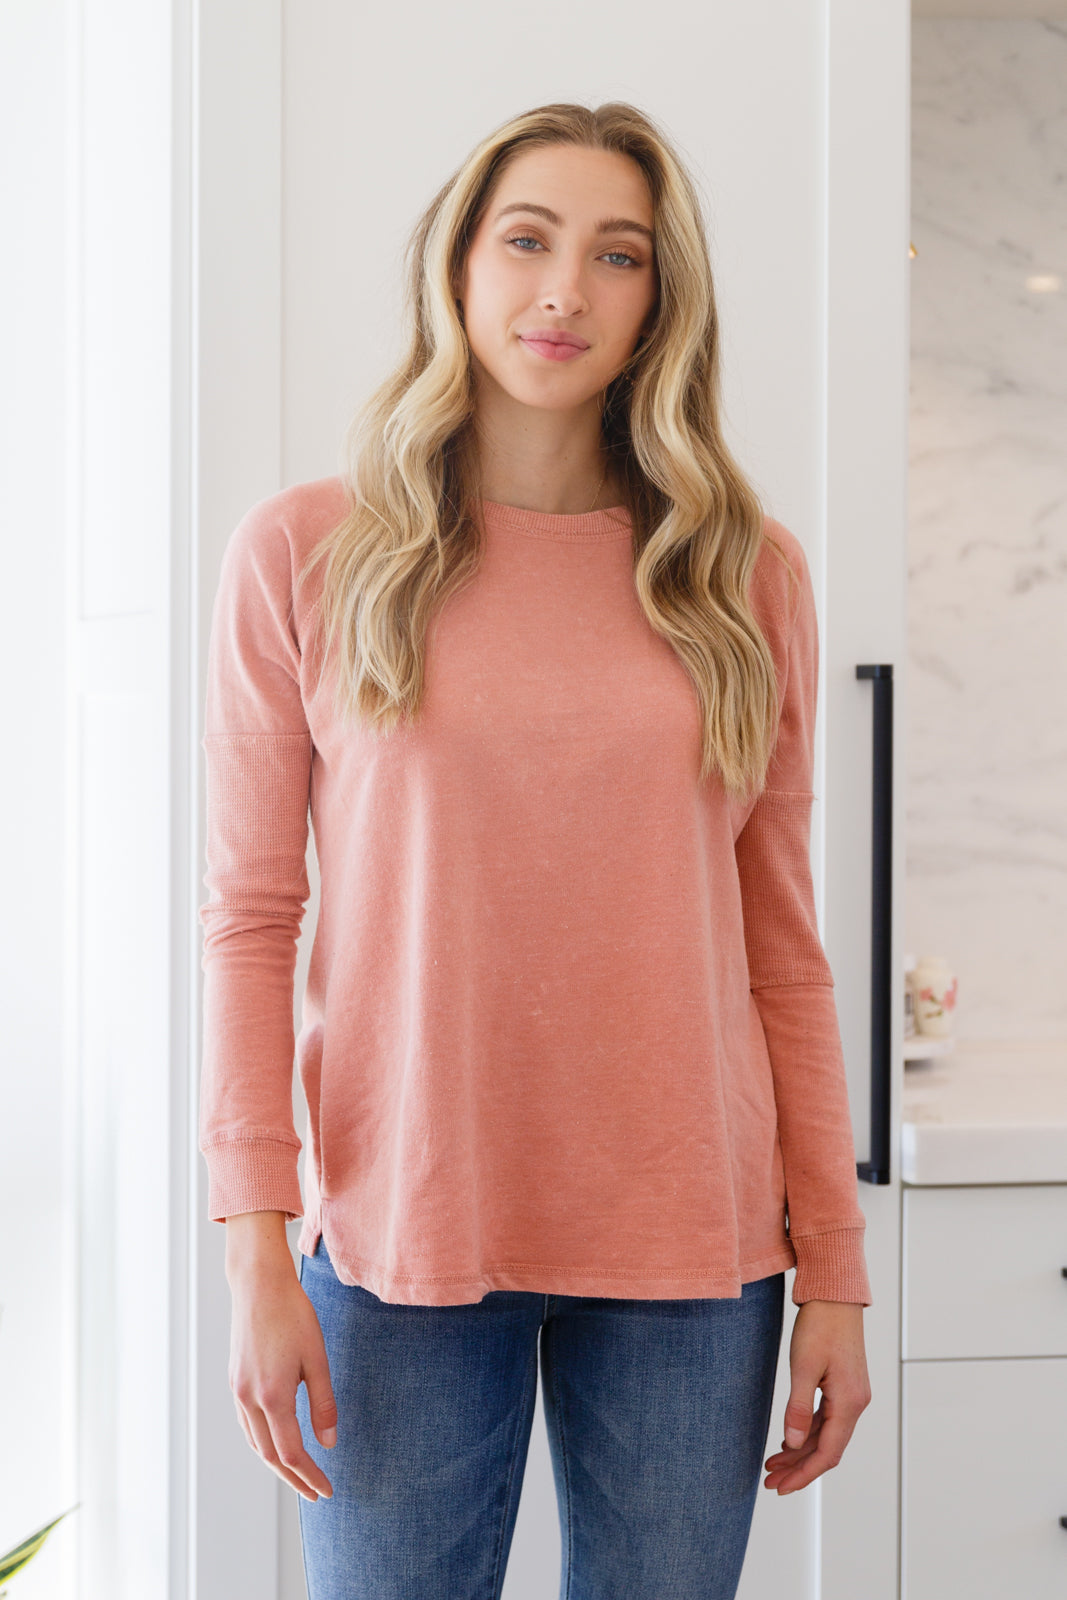 You'll find yourself always reaching for the Fun Beginnings Raglan Top In Dusty Mauve